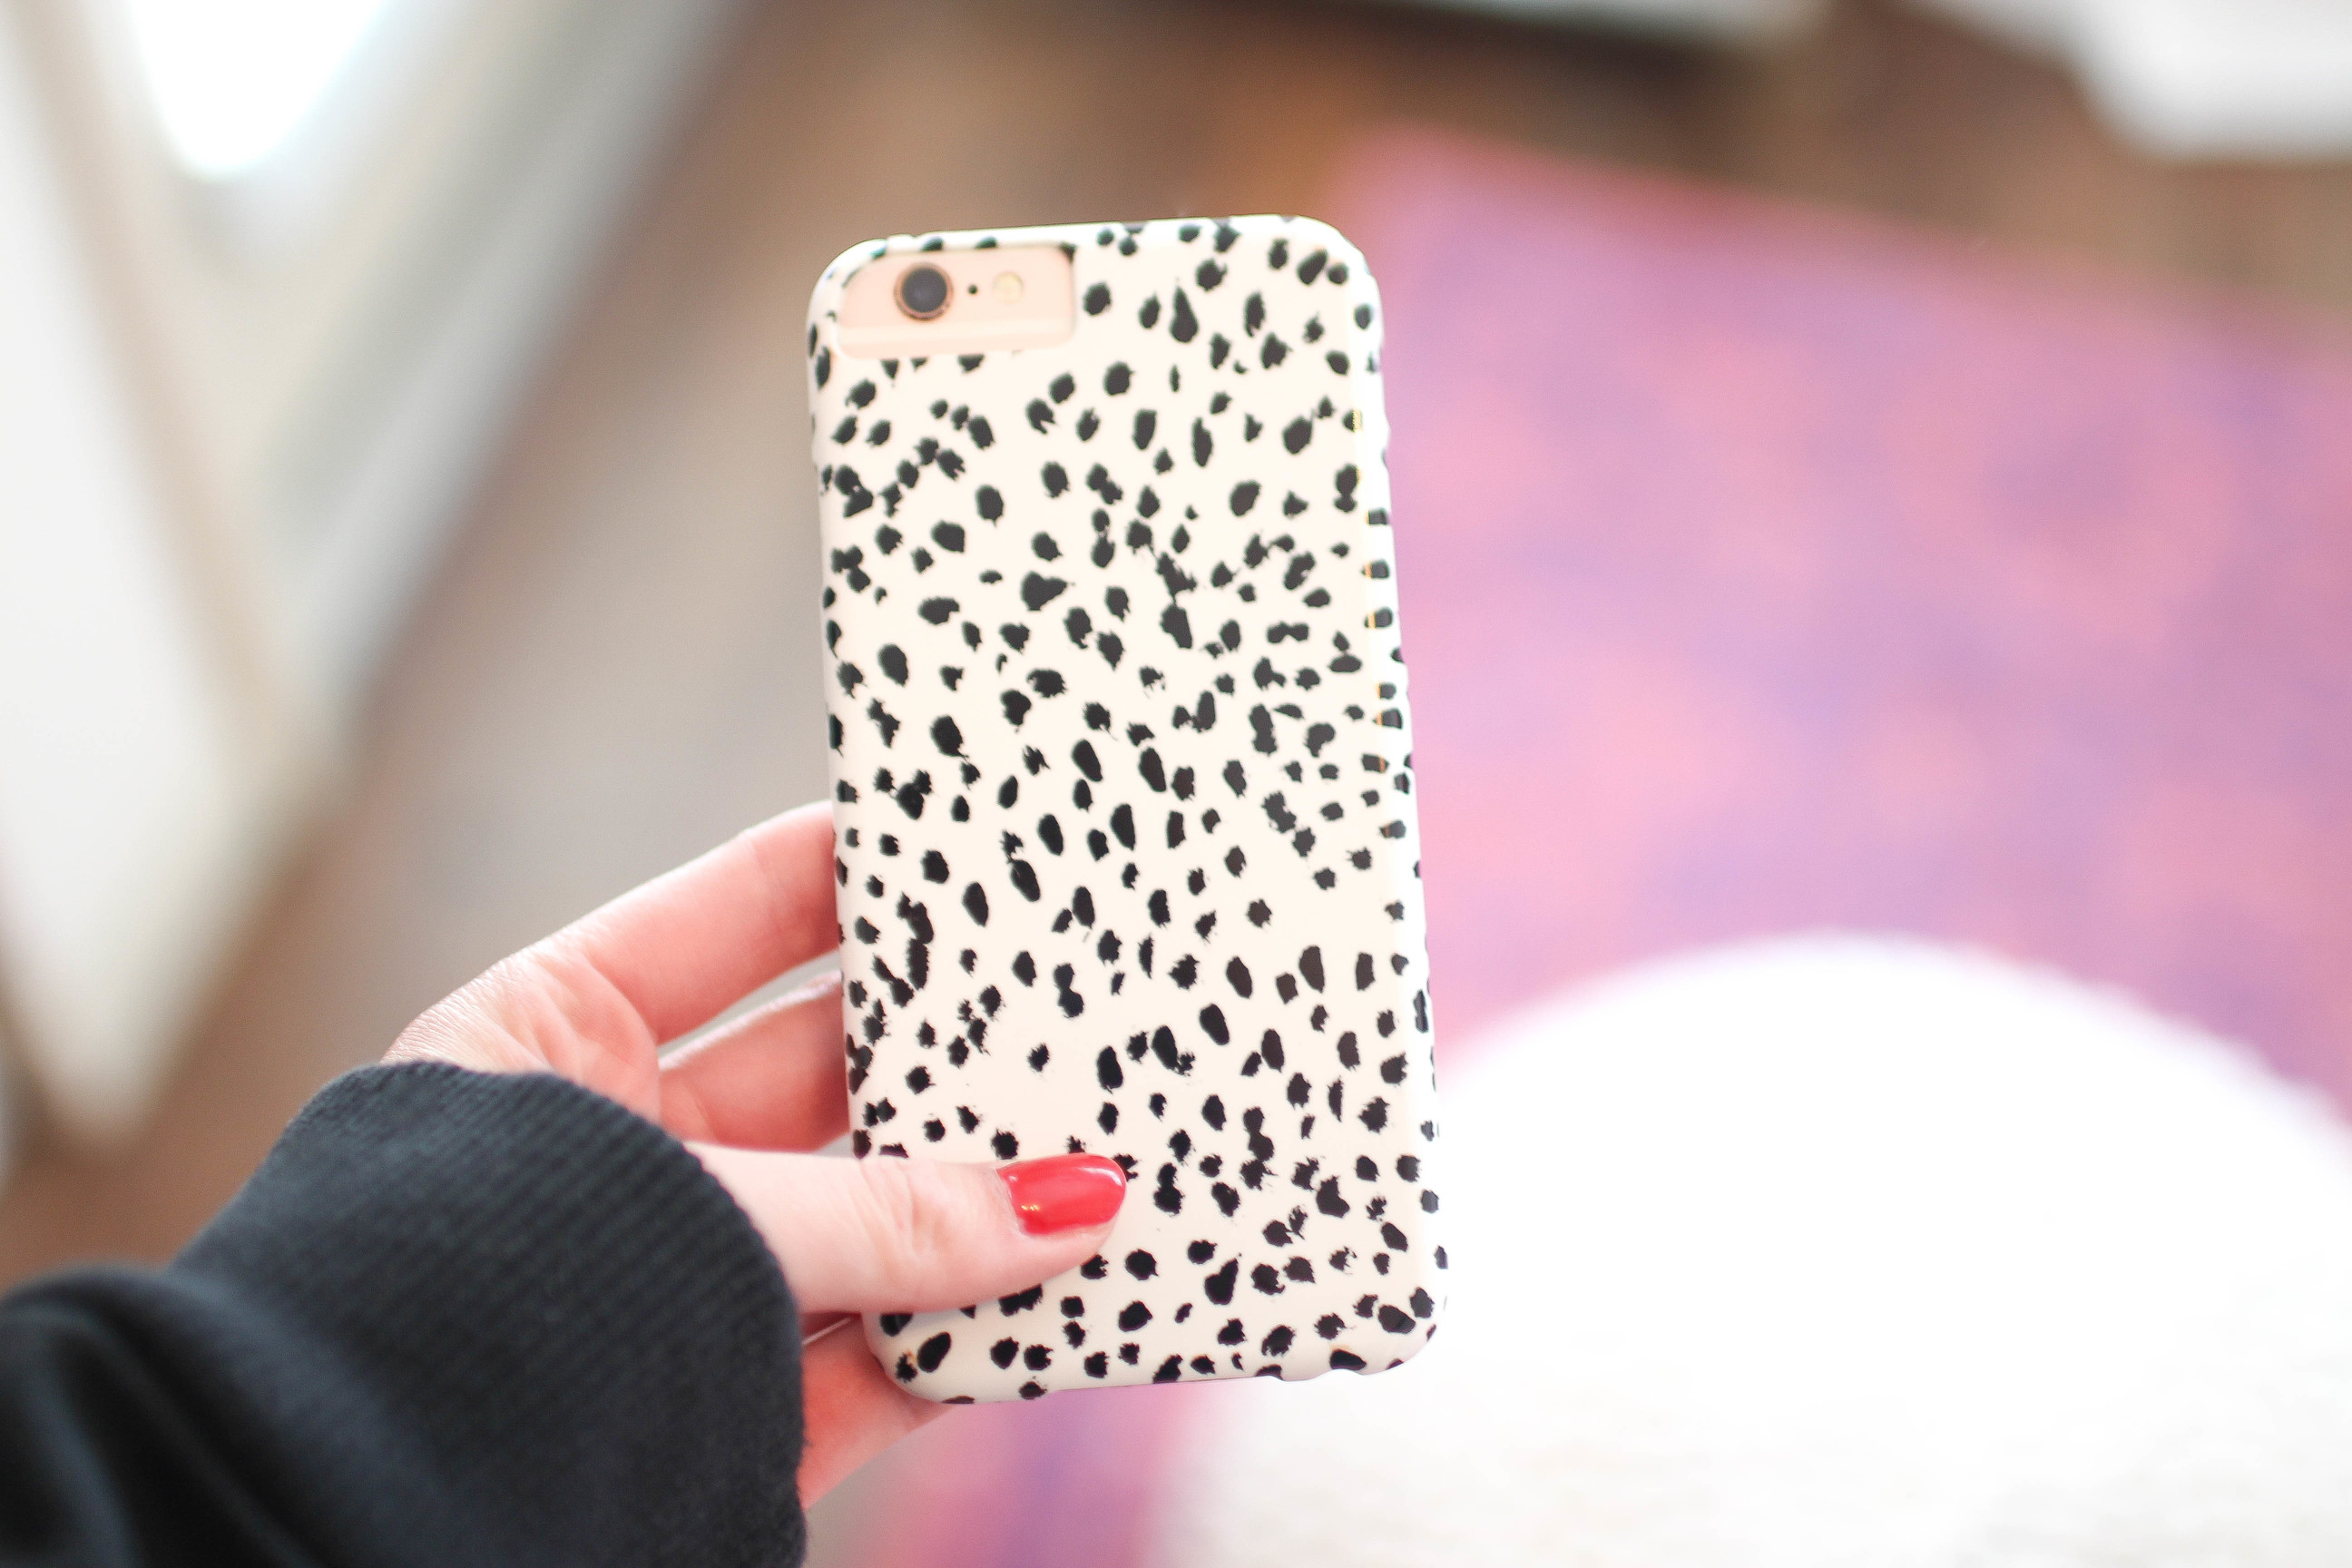 Dalmatian print obsession by Lauren Lindmark on Daily Dose of Charm